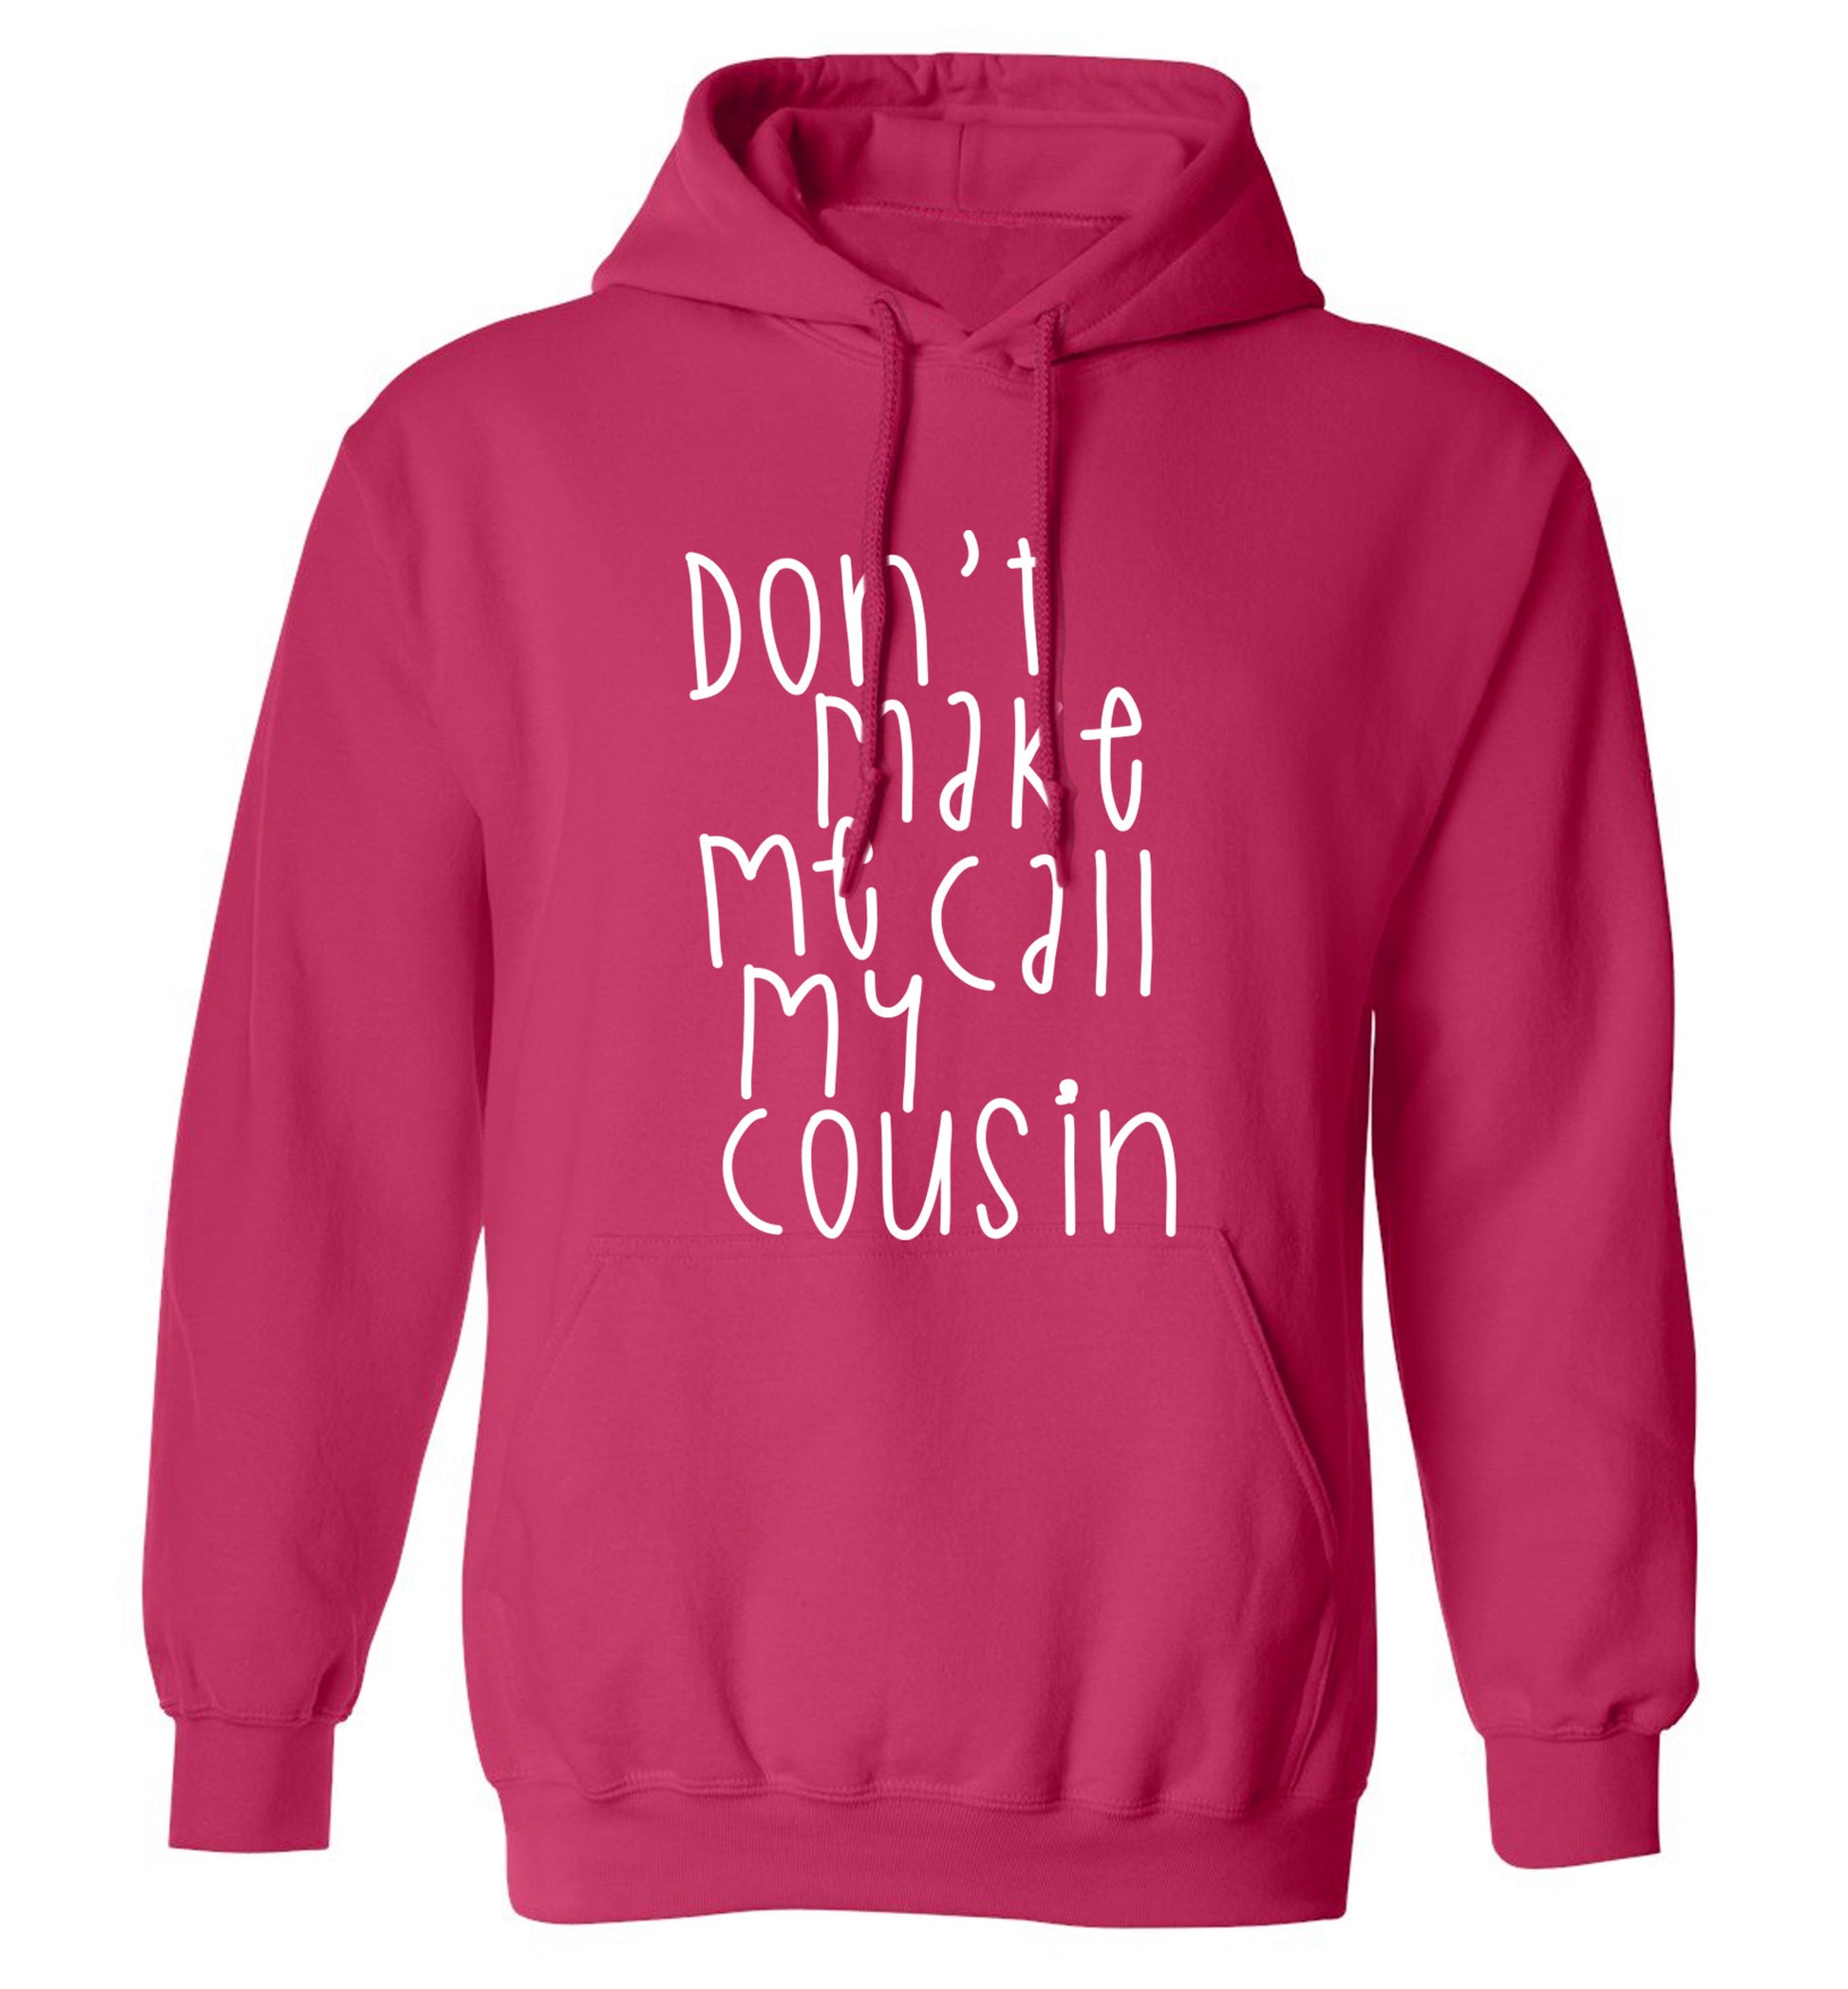 Don't make me call my cousin adults unisex pink hoodie 2XL